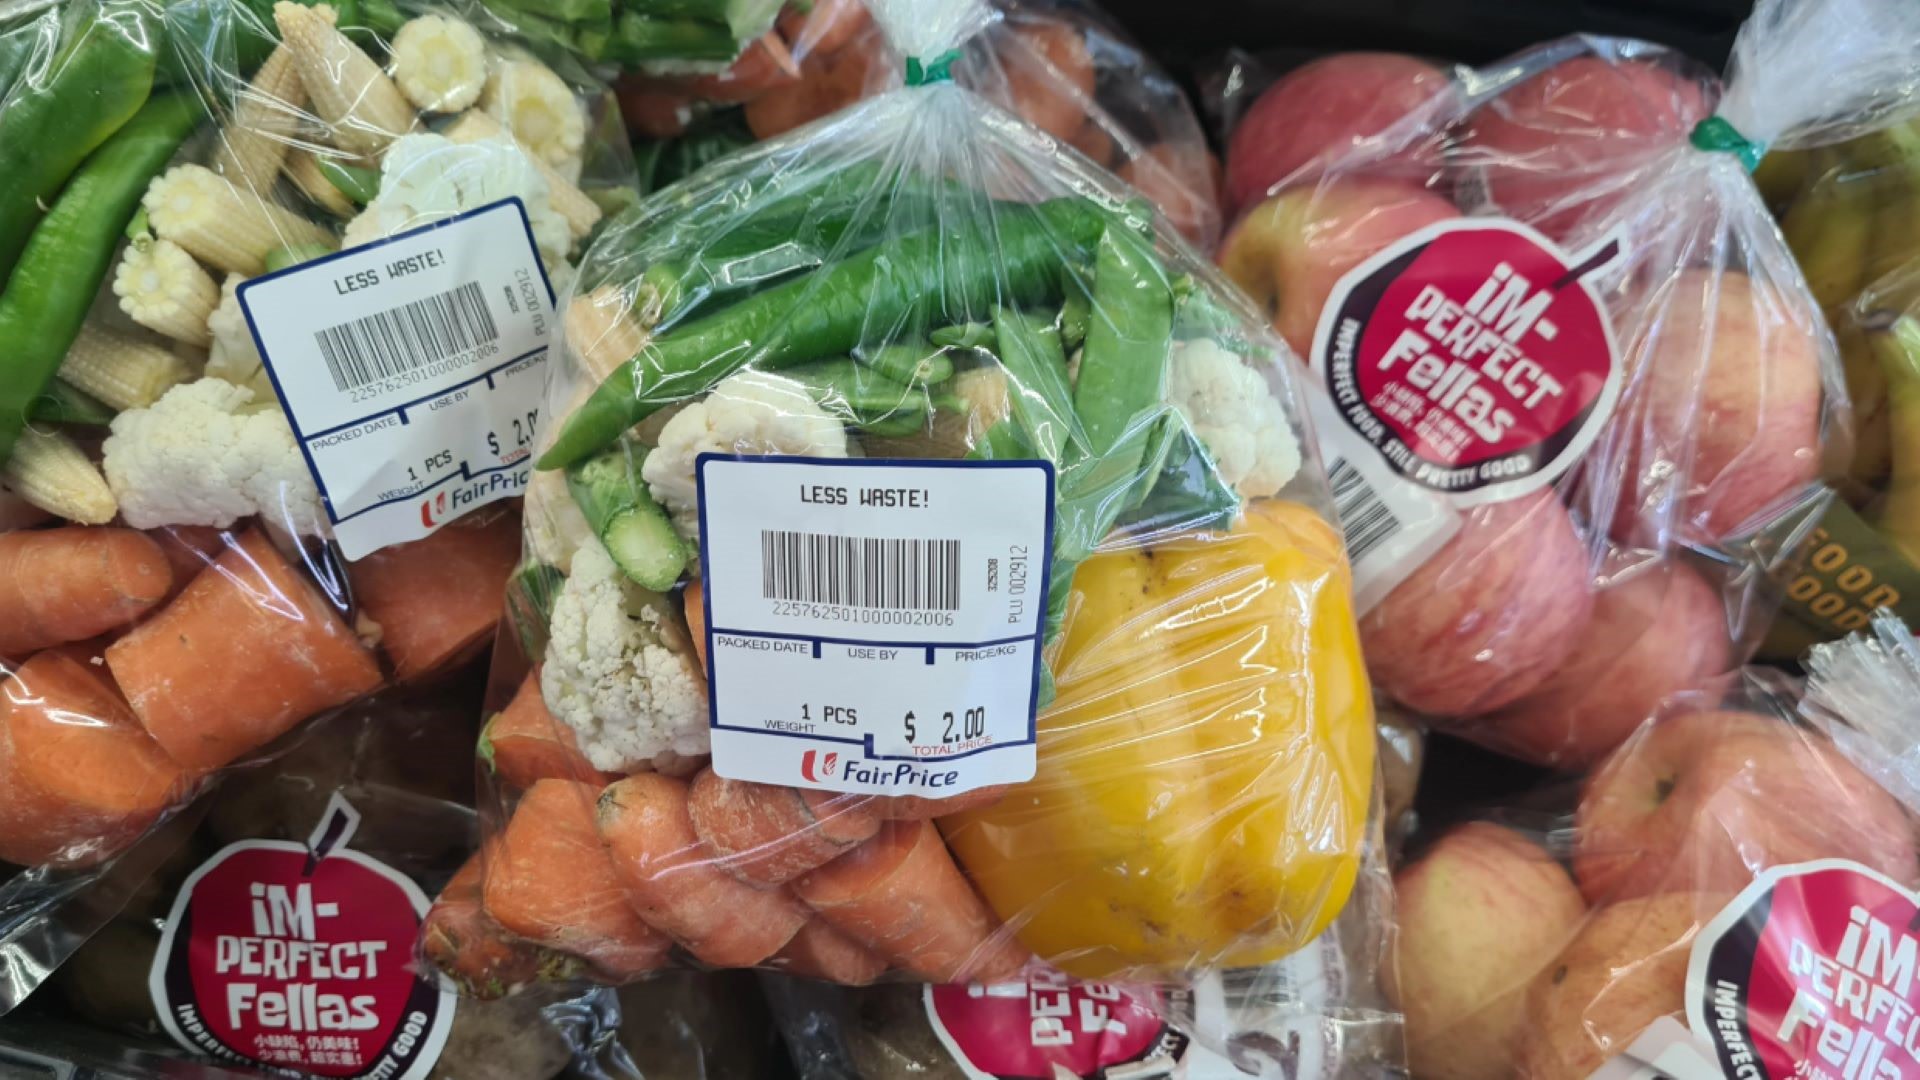 5 times stores stunned customers with their food waste policies